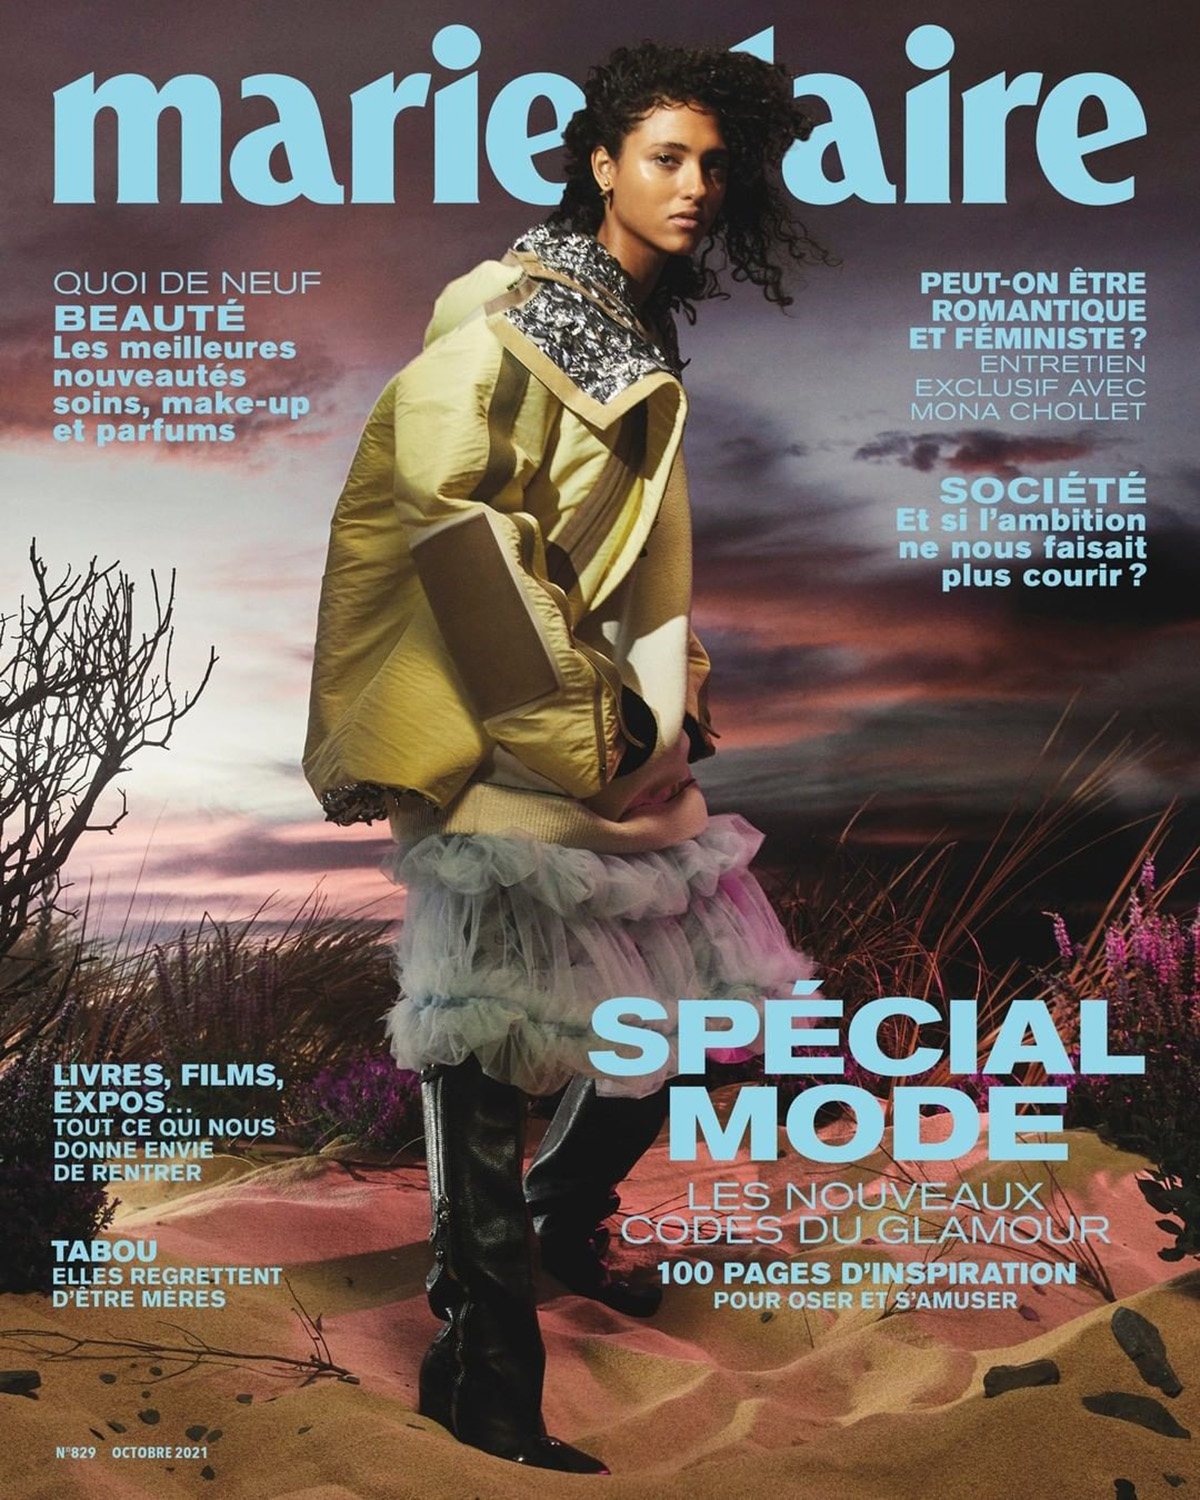 Mélodie Vaxelaire and Iris Delcourt cover Marie Claire France October 2021 by Van Mossevelde + N